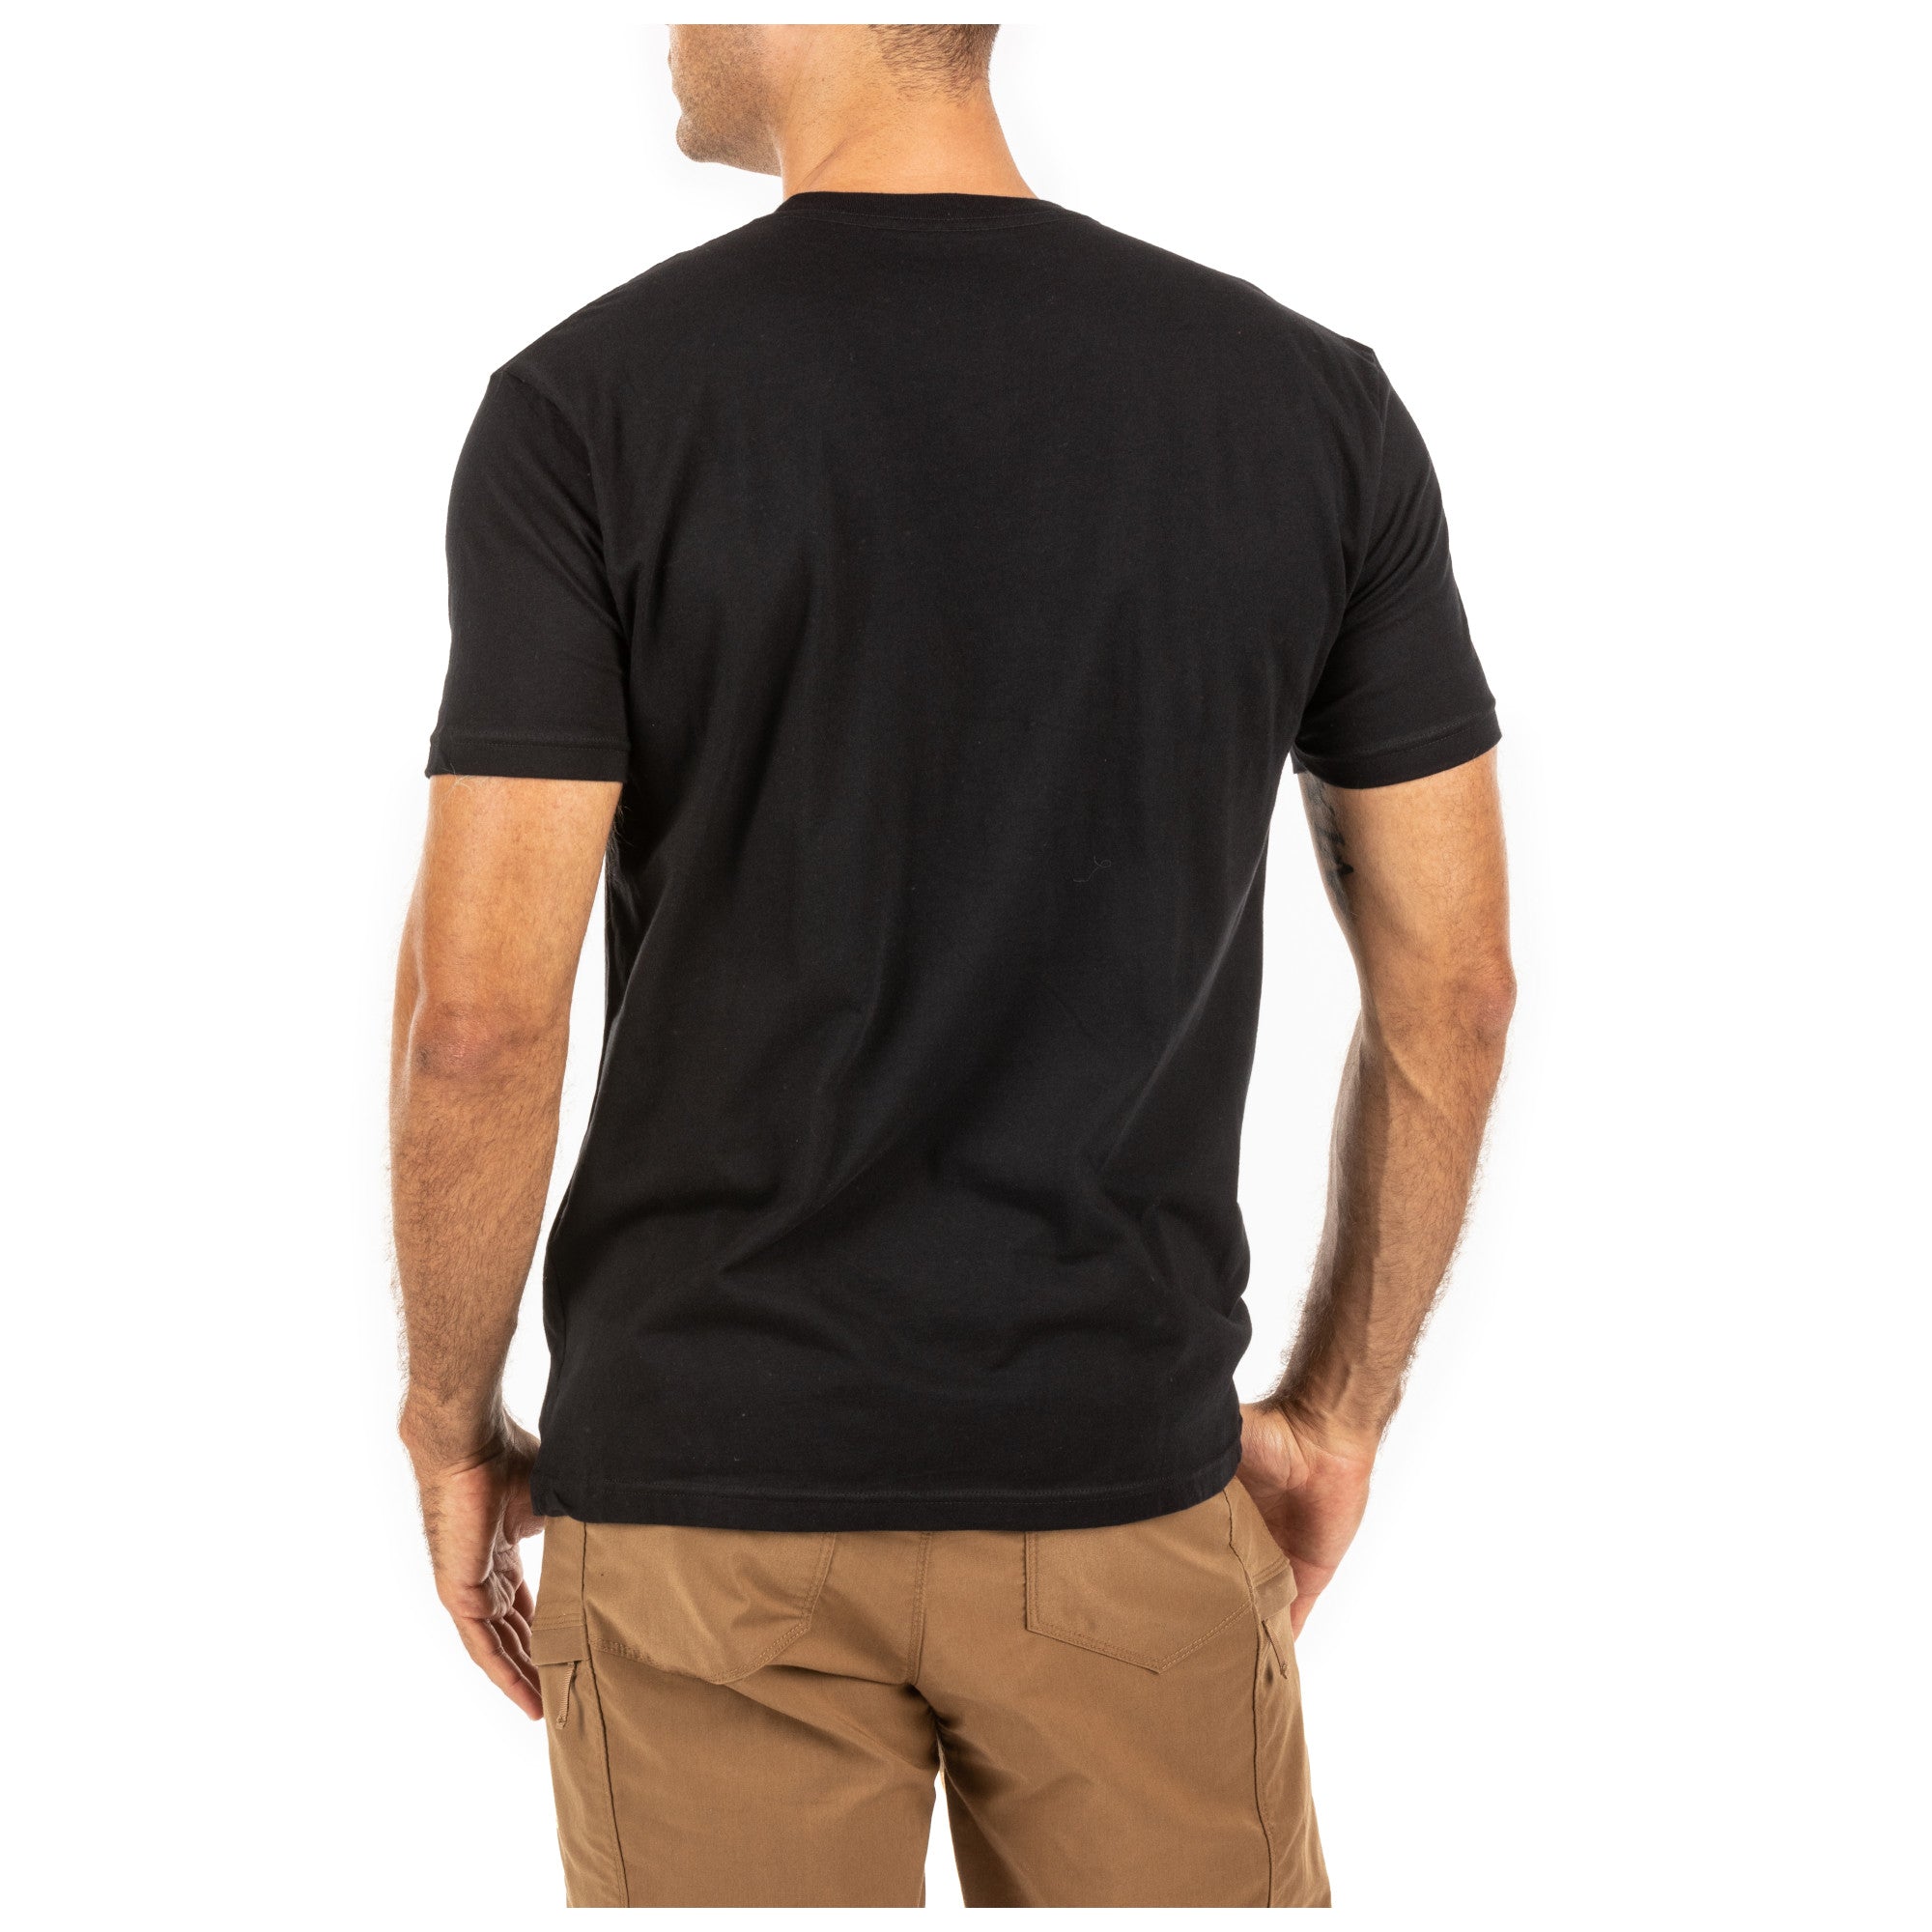 5.11 Tactical Crossed Axe Mountain Tee Black Tees & Tanks 5.11 Tactical Small Tactical Gear Supplier Tactical Distributors Australia